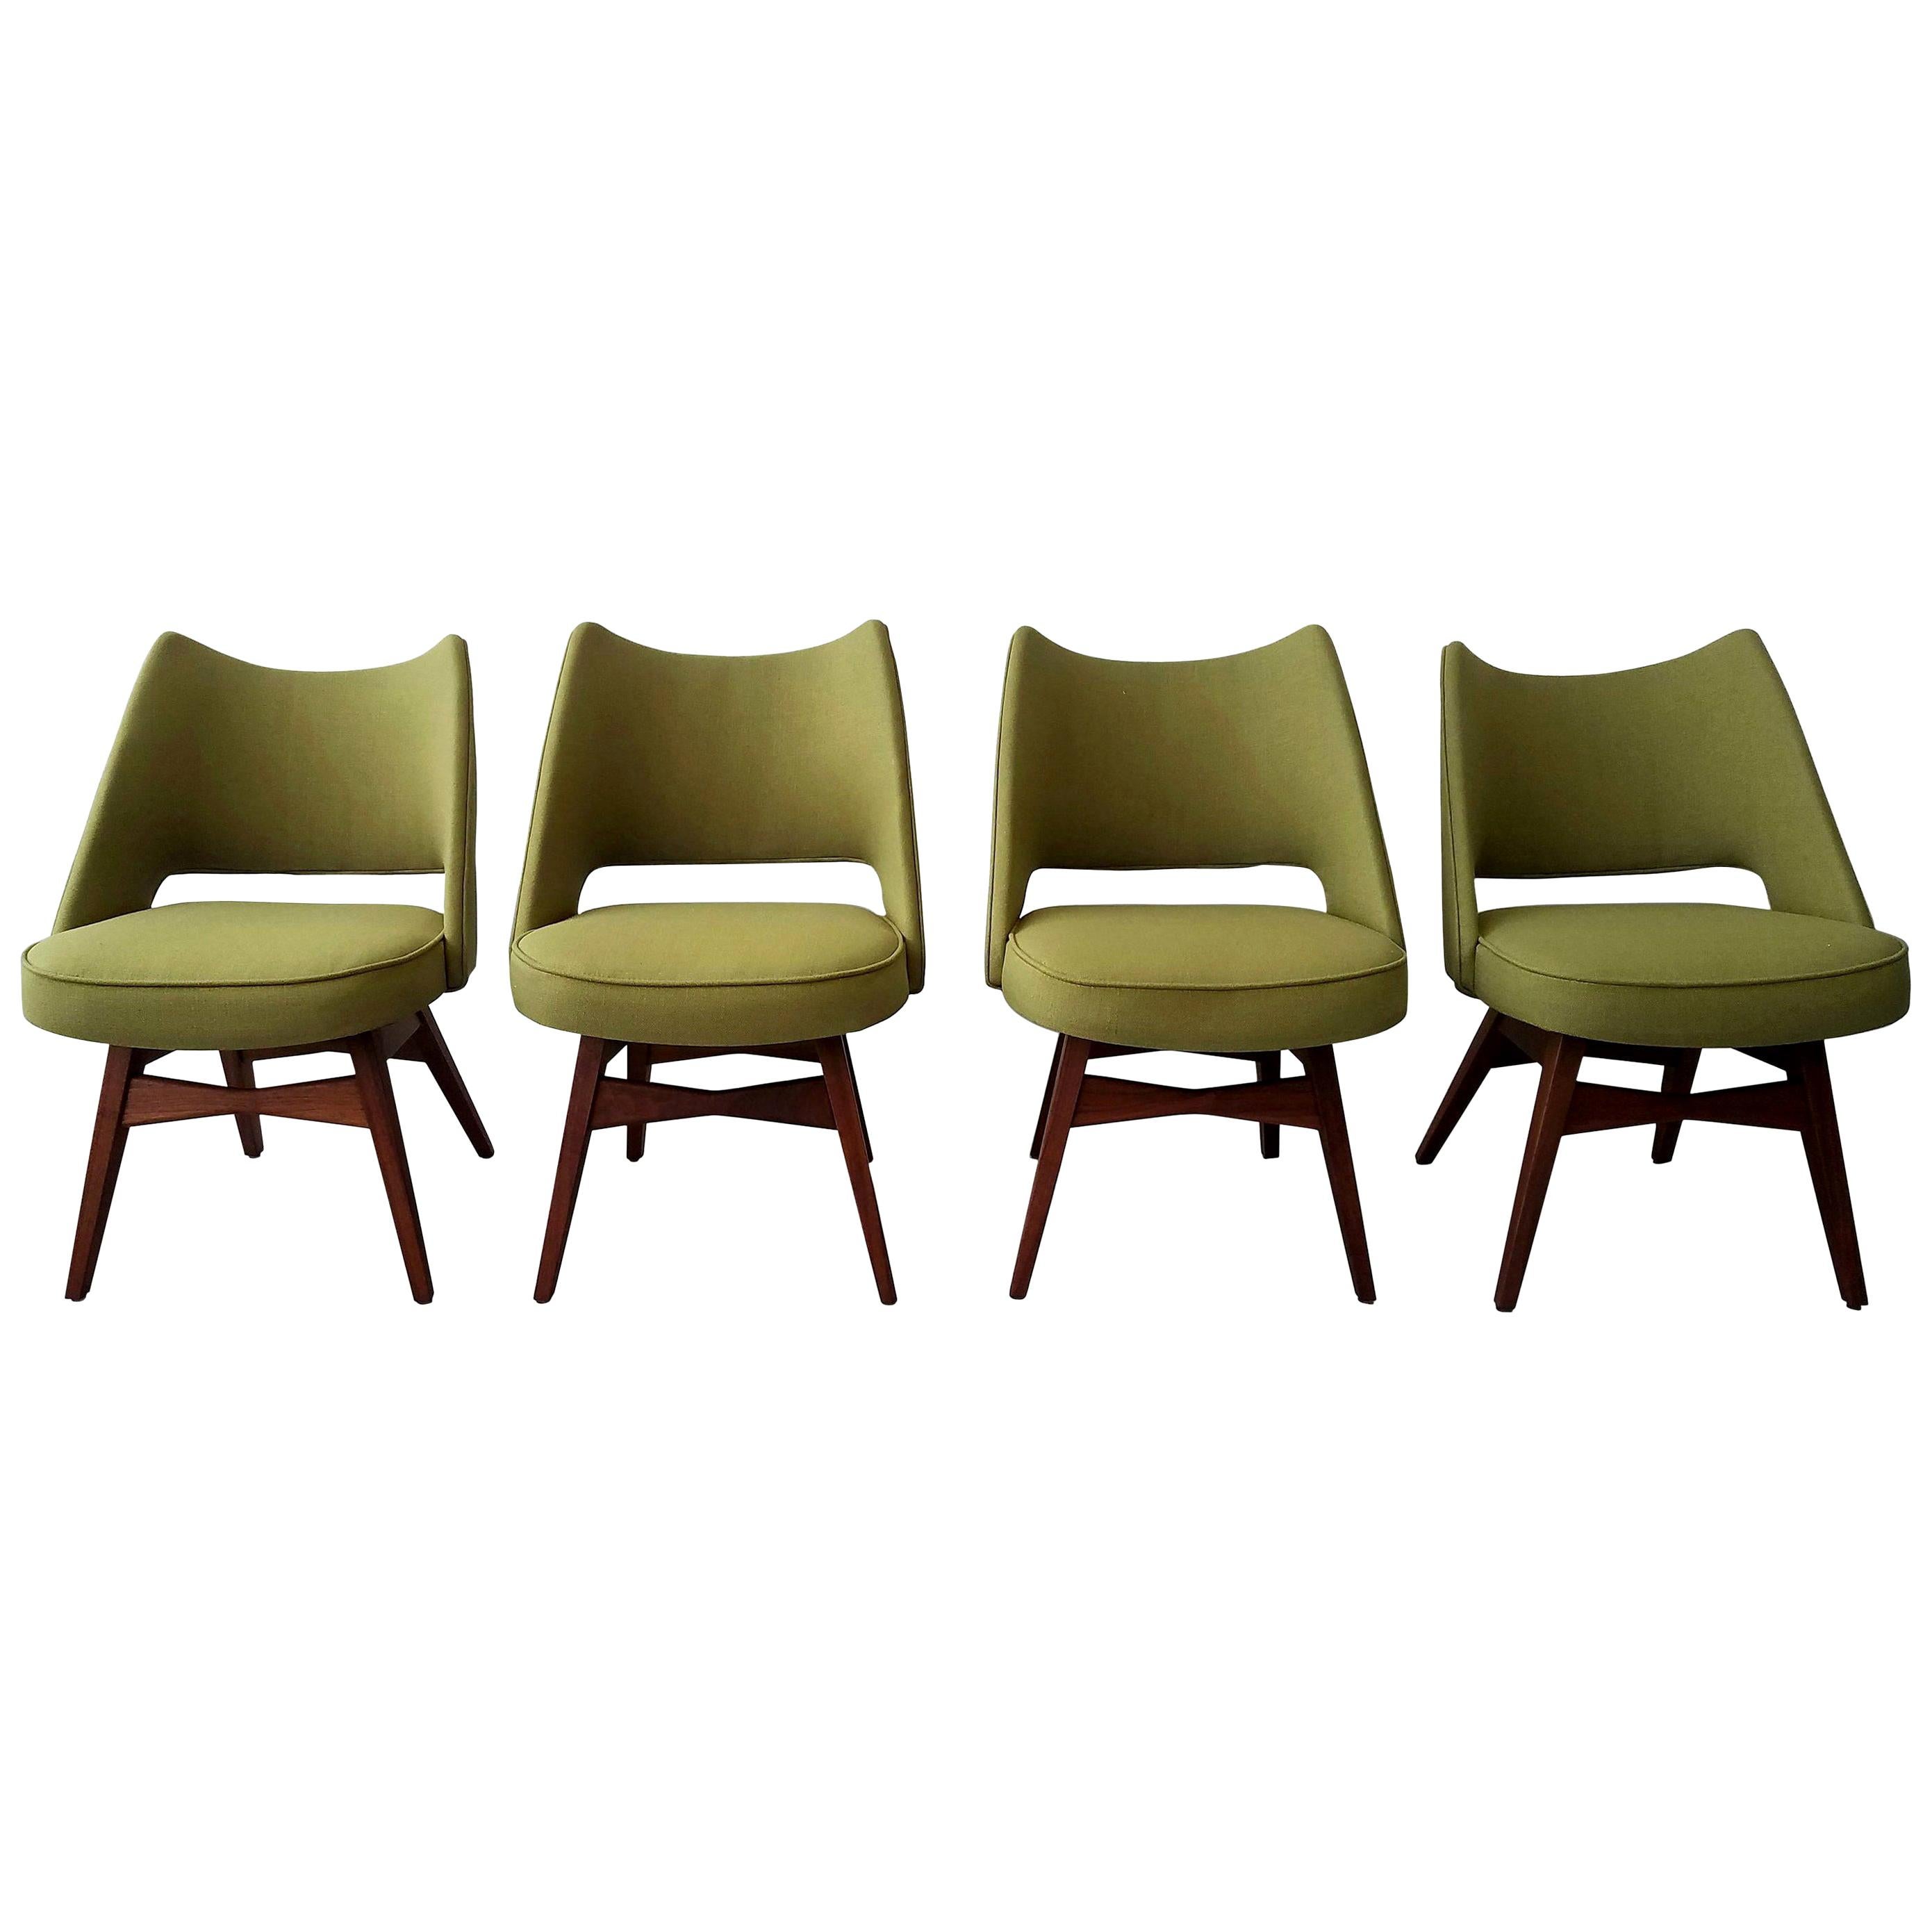 Set of 4 Midcentury Chairs